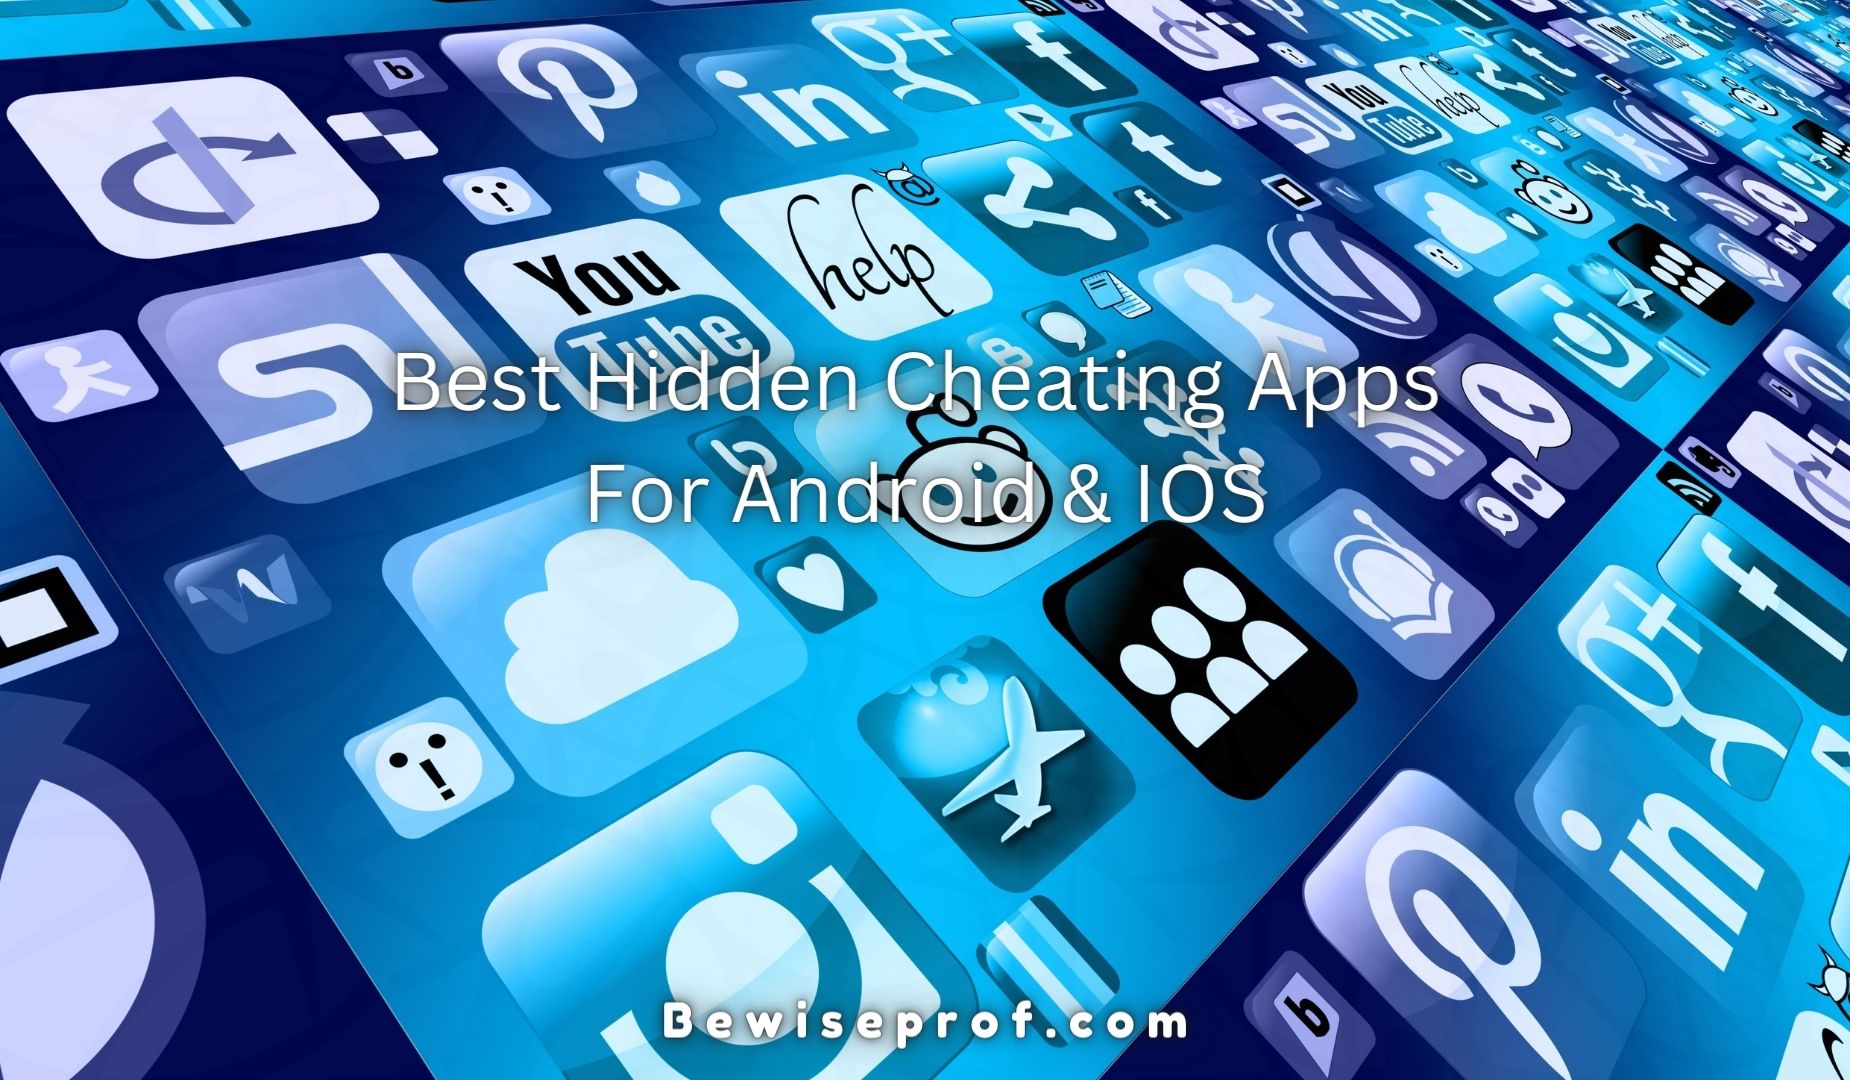 Best Hidden Cheating Apps For Android & IOS